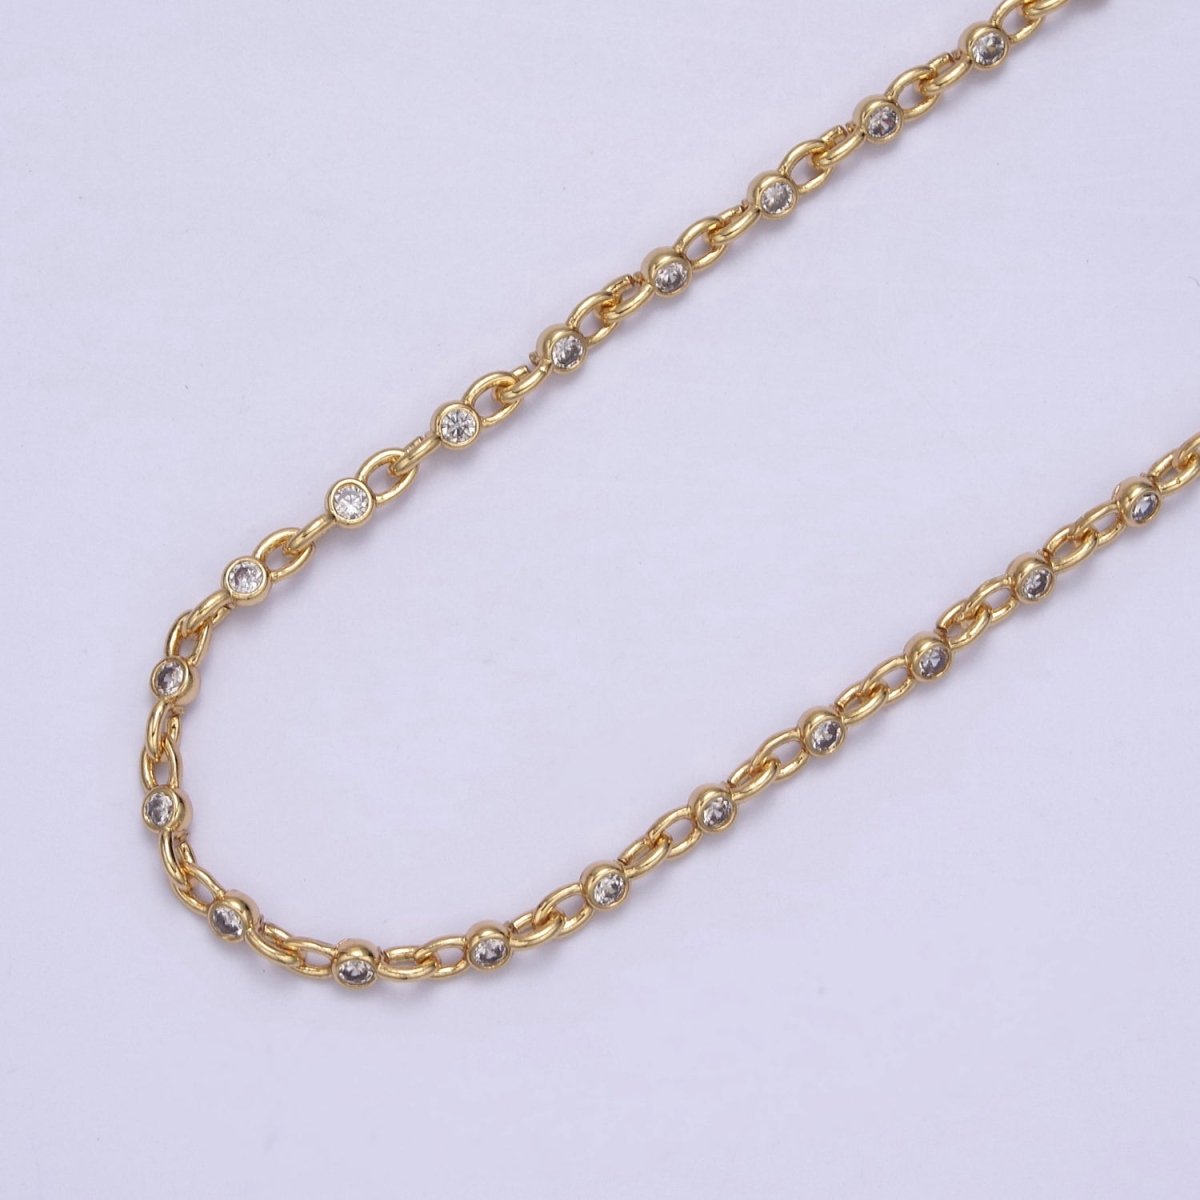 Mini 24k Gold Filled Chain Round CZ Chain by Foot / Yard Bulk Chain Round Bezel Cut Cubic Chains 2.5mm CZ Chain Unsoldered | ROLL-750 751 752 753 Clearance Pricing - DLUXCA